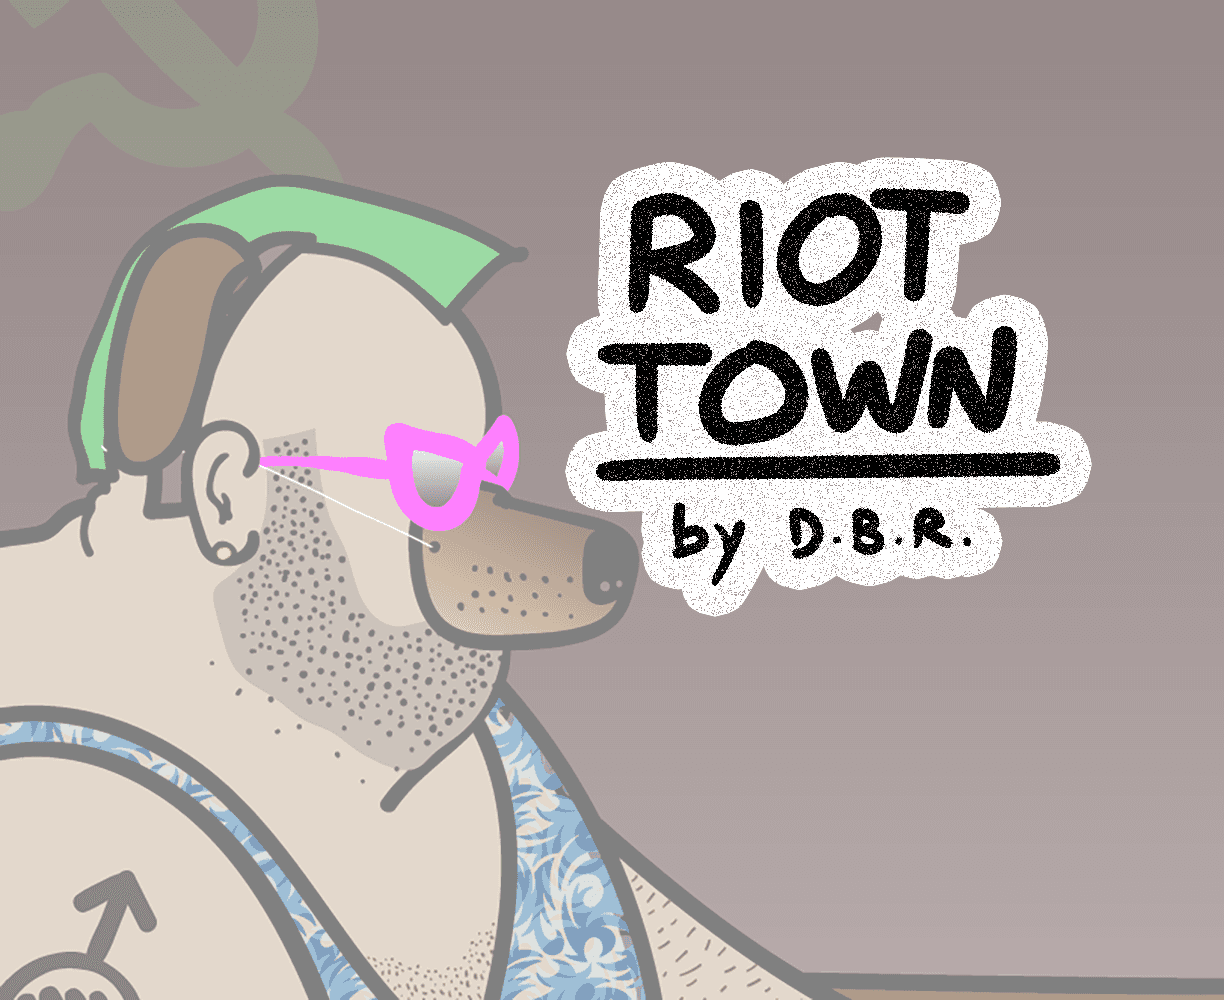 The cover art for the episode Doxxer Poodle from the comics series Riot Town, USA, which is number 50 in the series